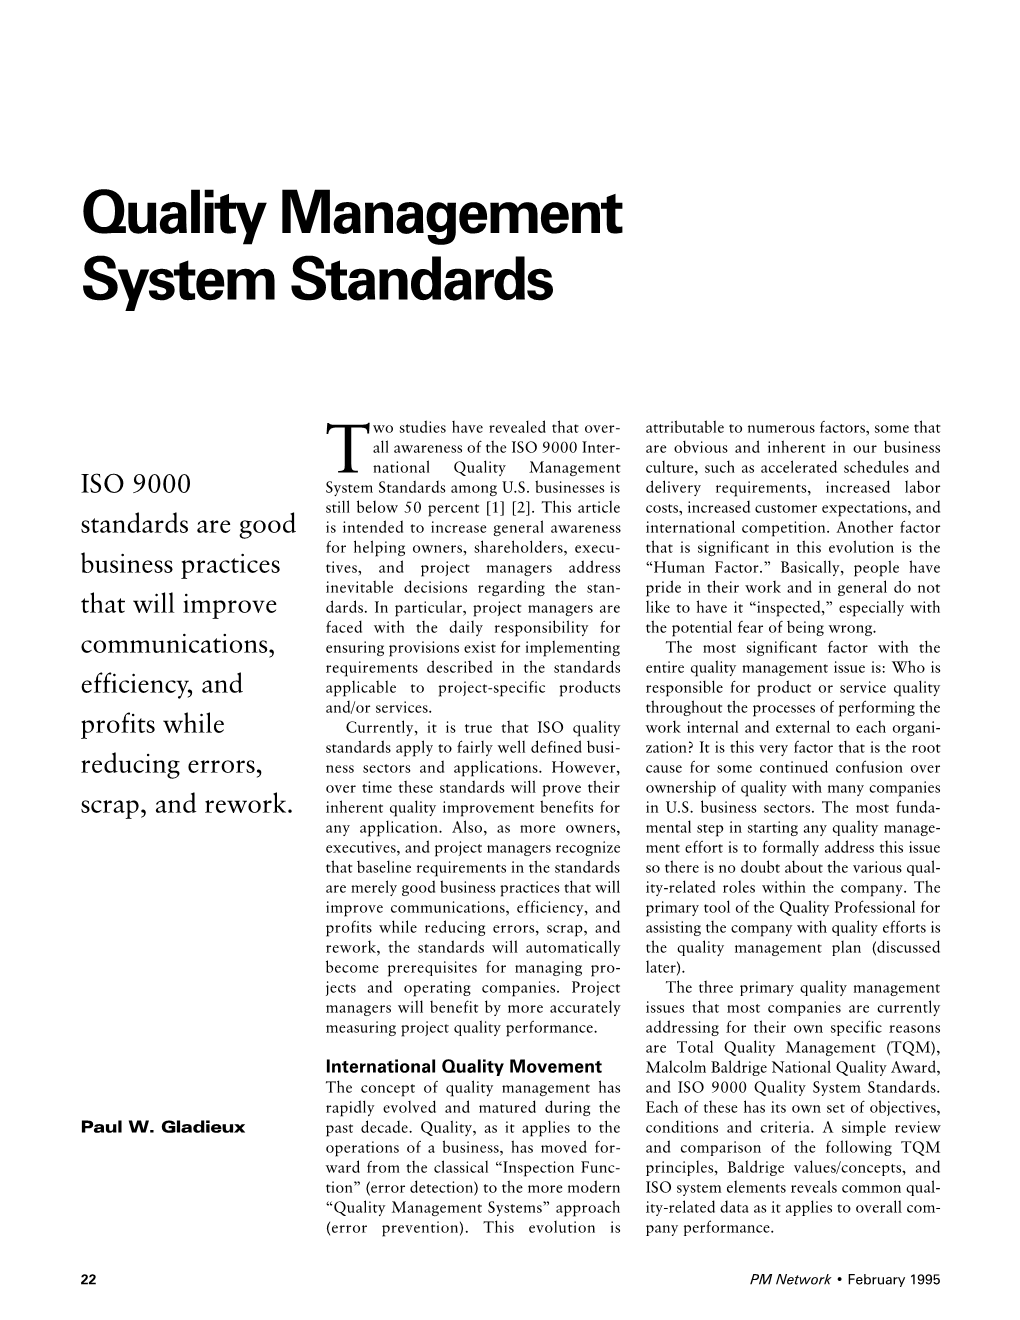 Quality Management Systems Standards